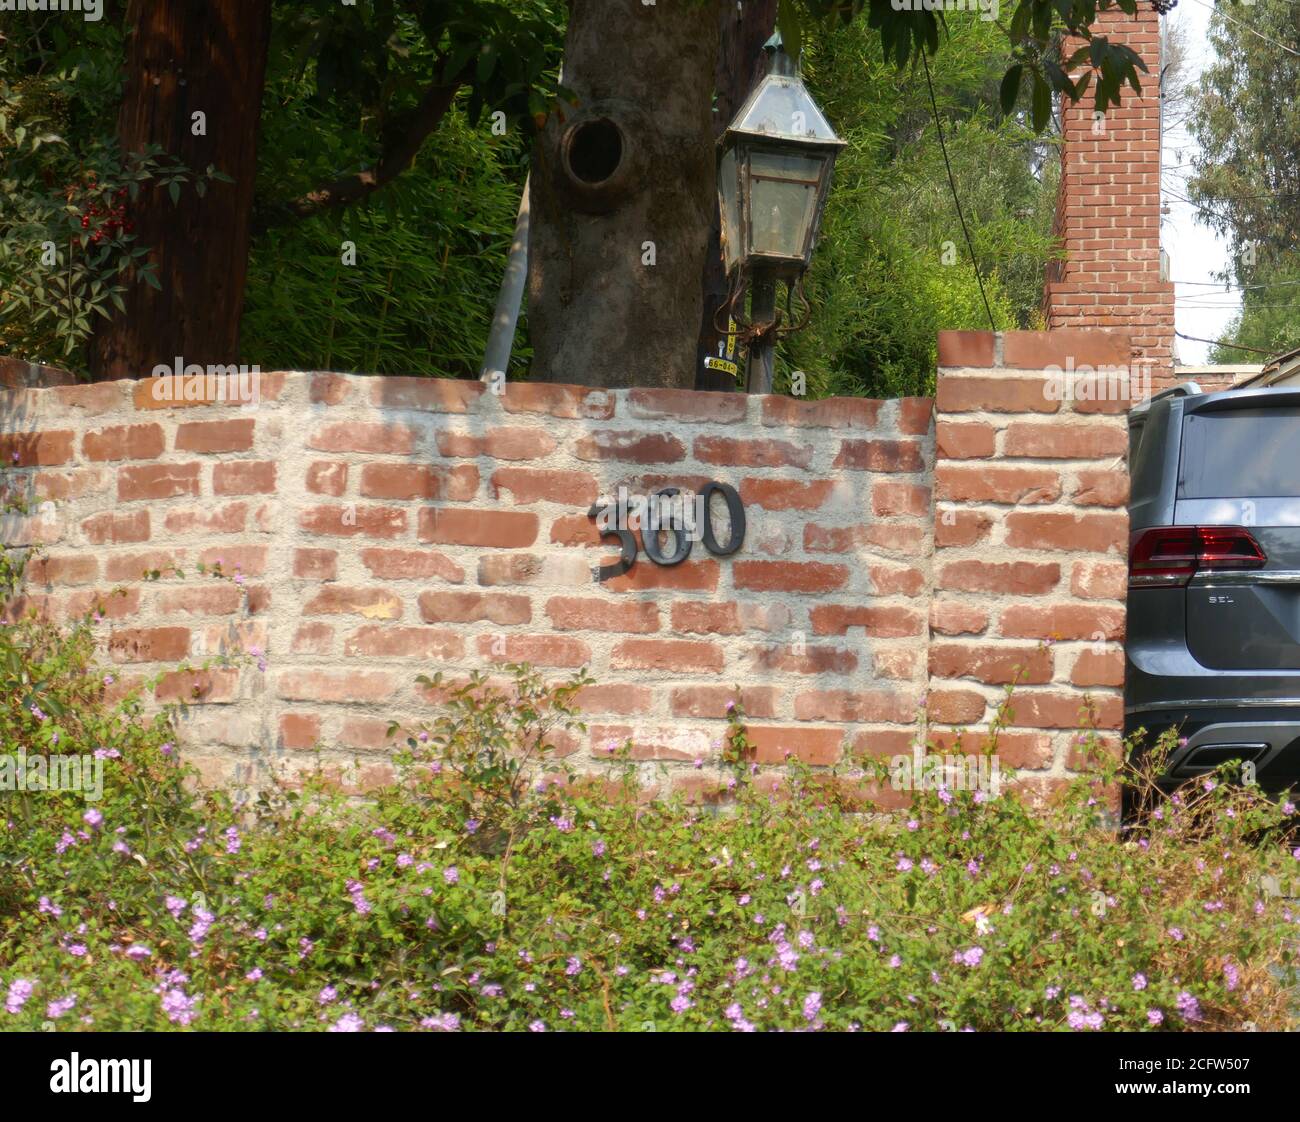 Los Angeles, California, USA 7th September 2020 A general view of atmosphere of actor Montgomery Clift's former home on September 7, 2020 at 360 N.Kenter Avenue in Los Angeles, California, USA. Photo by Barry King/Alamy Stock Photo Stock Photo